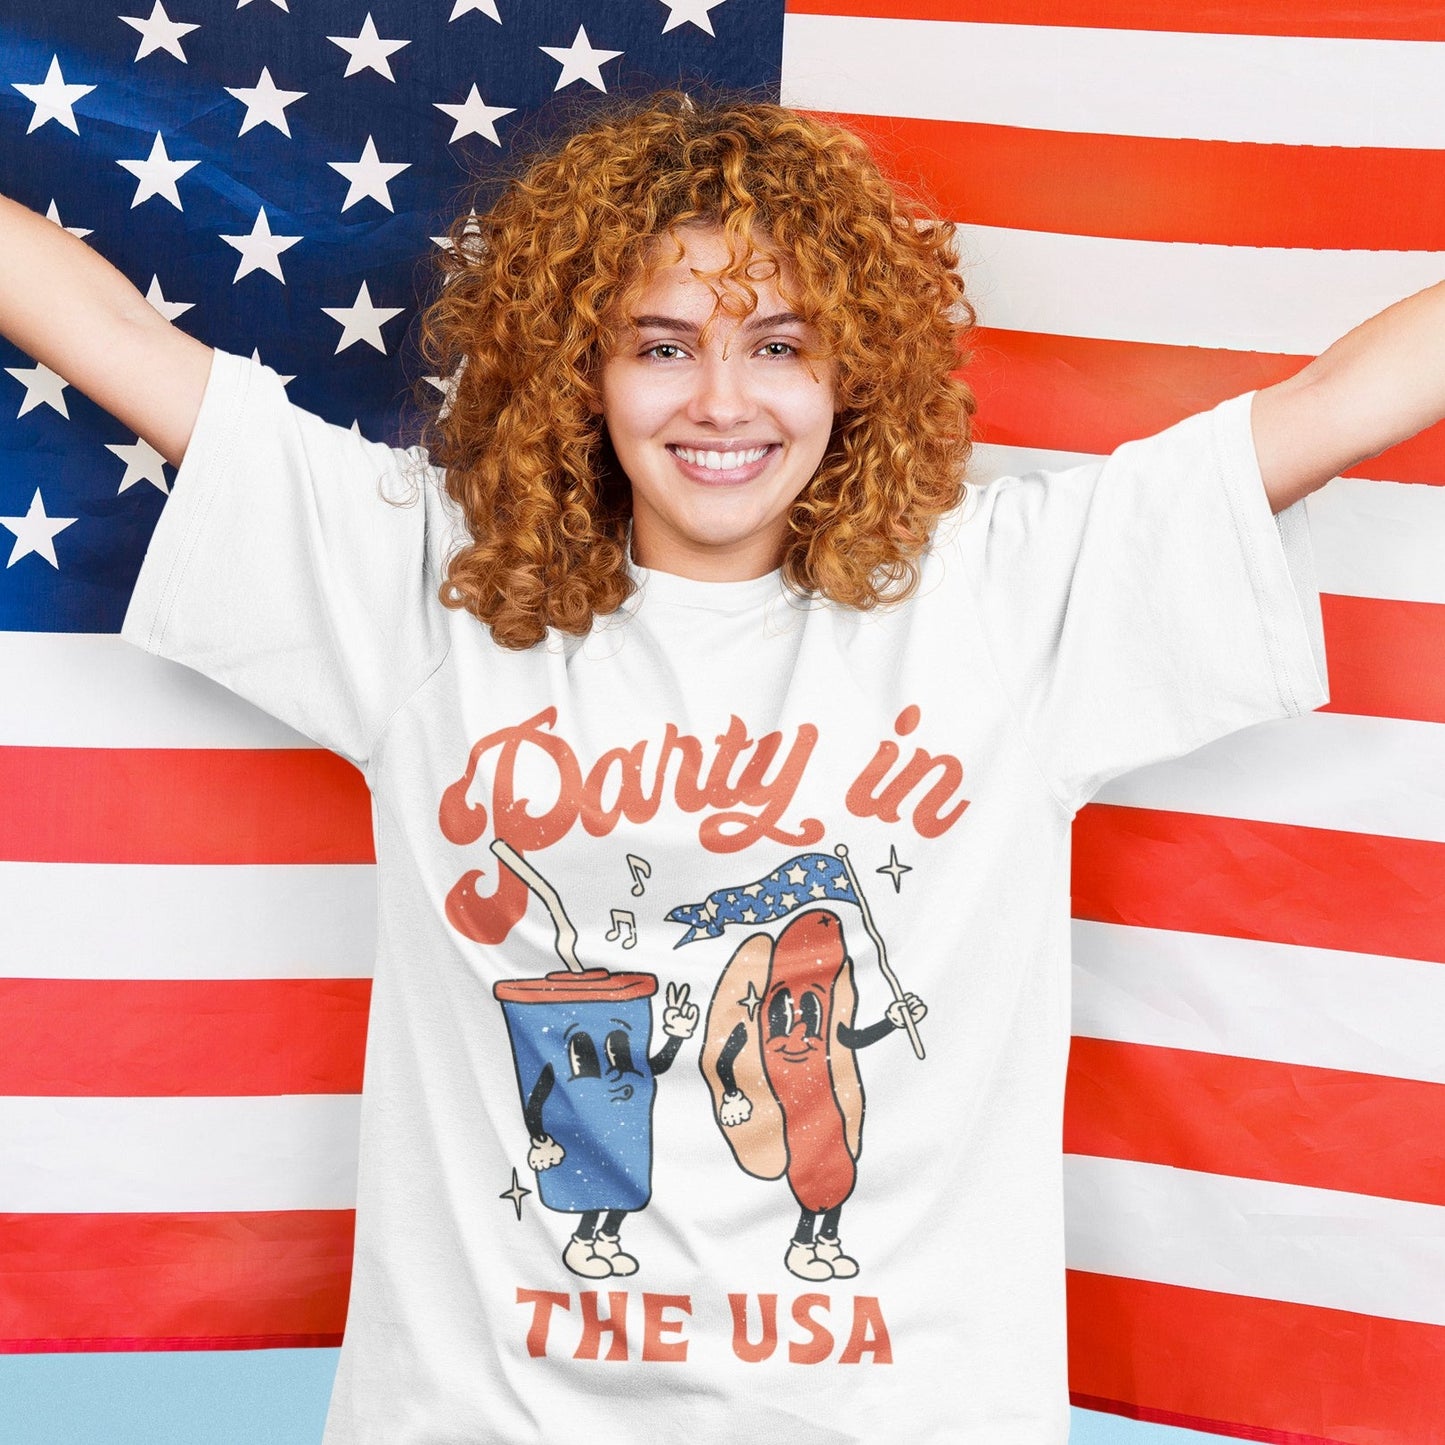 Party in the USA T-shirt